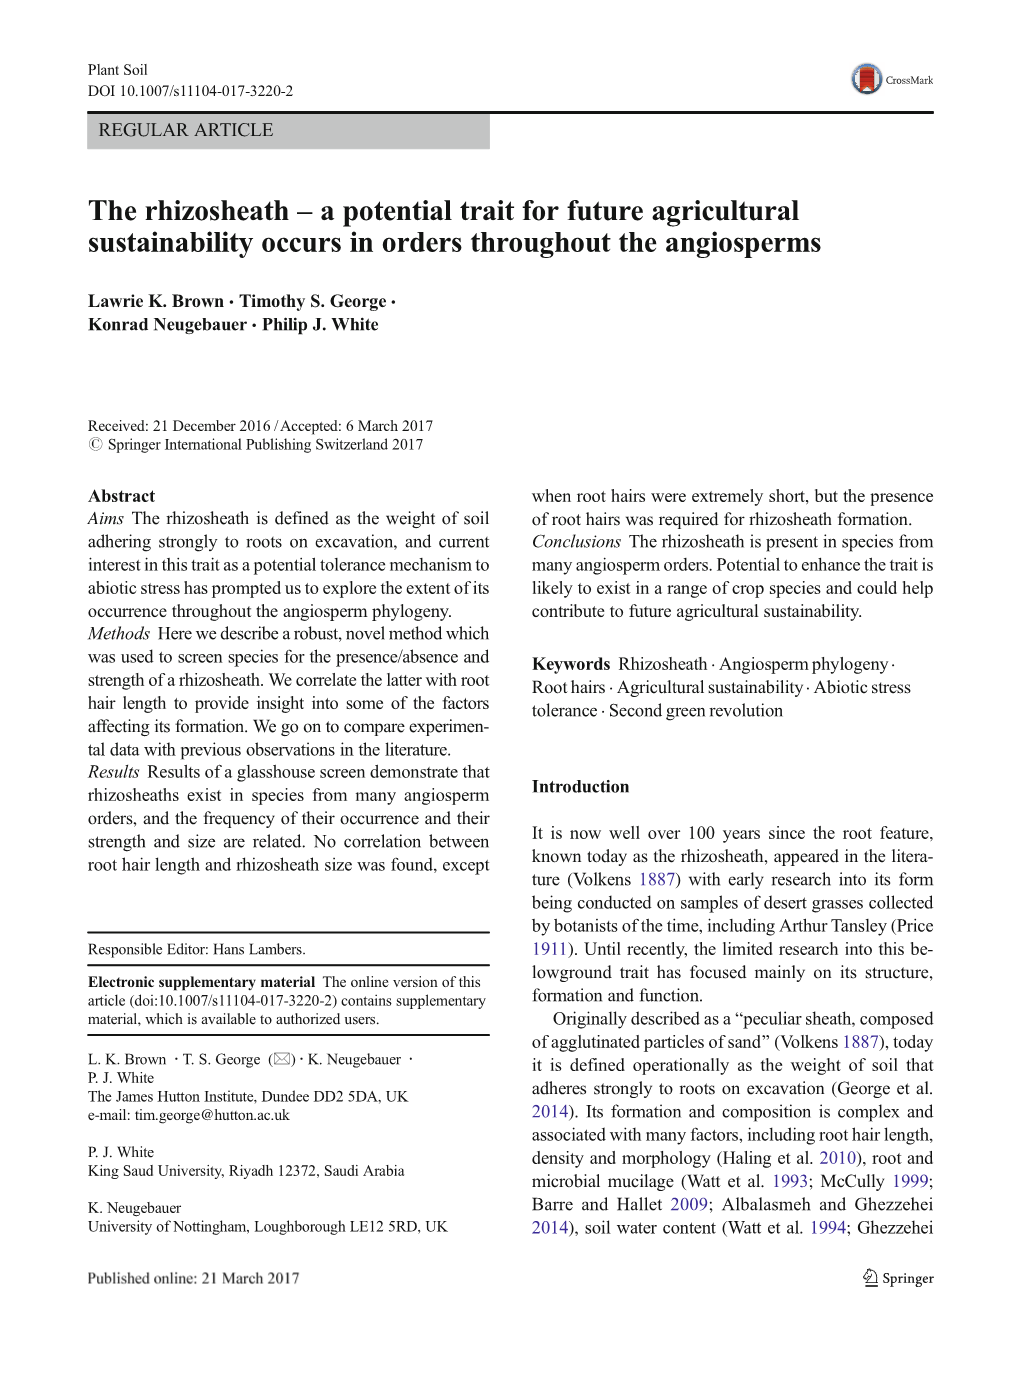 The Rhizosheath – a Potential Trait for Future Agricultural Sustainability Occurs in Orders Throughout the Angiosperms